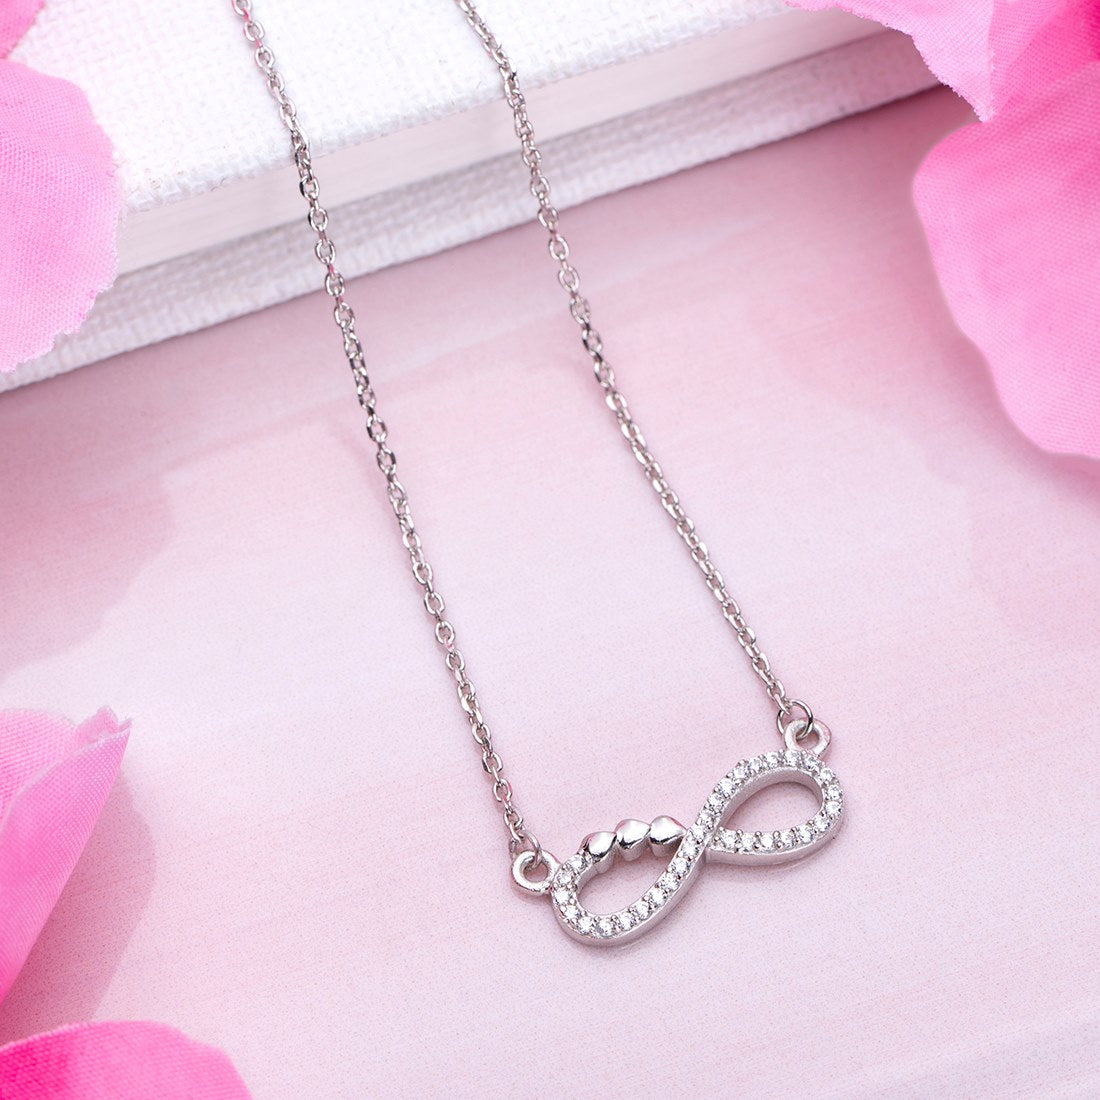 Eternal Radiance Rhodium-Plated 925 Sterling Silver Necklace